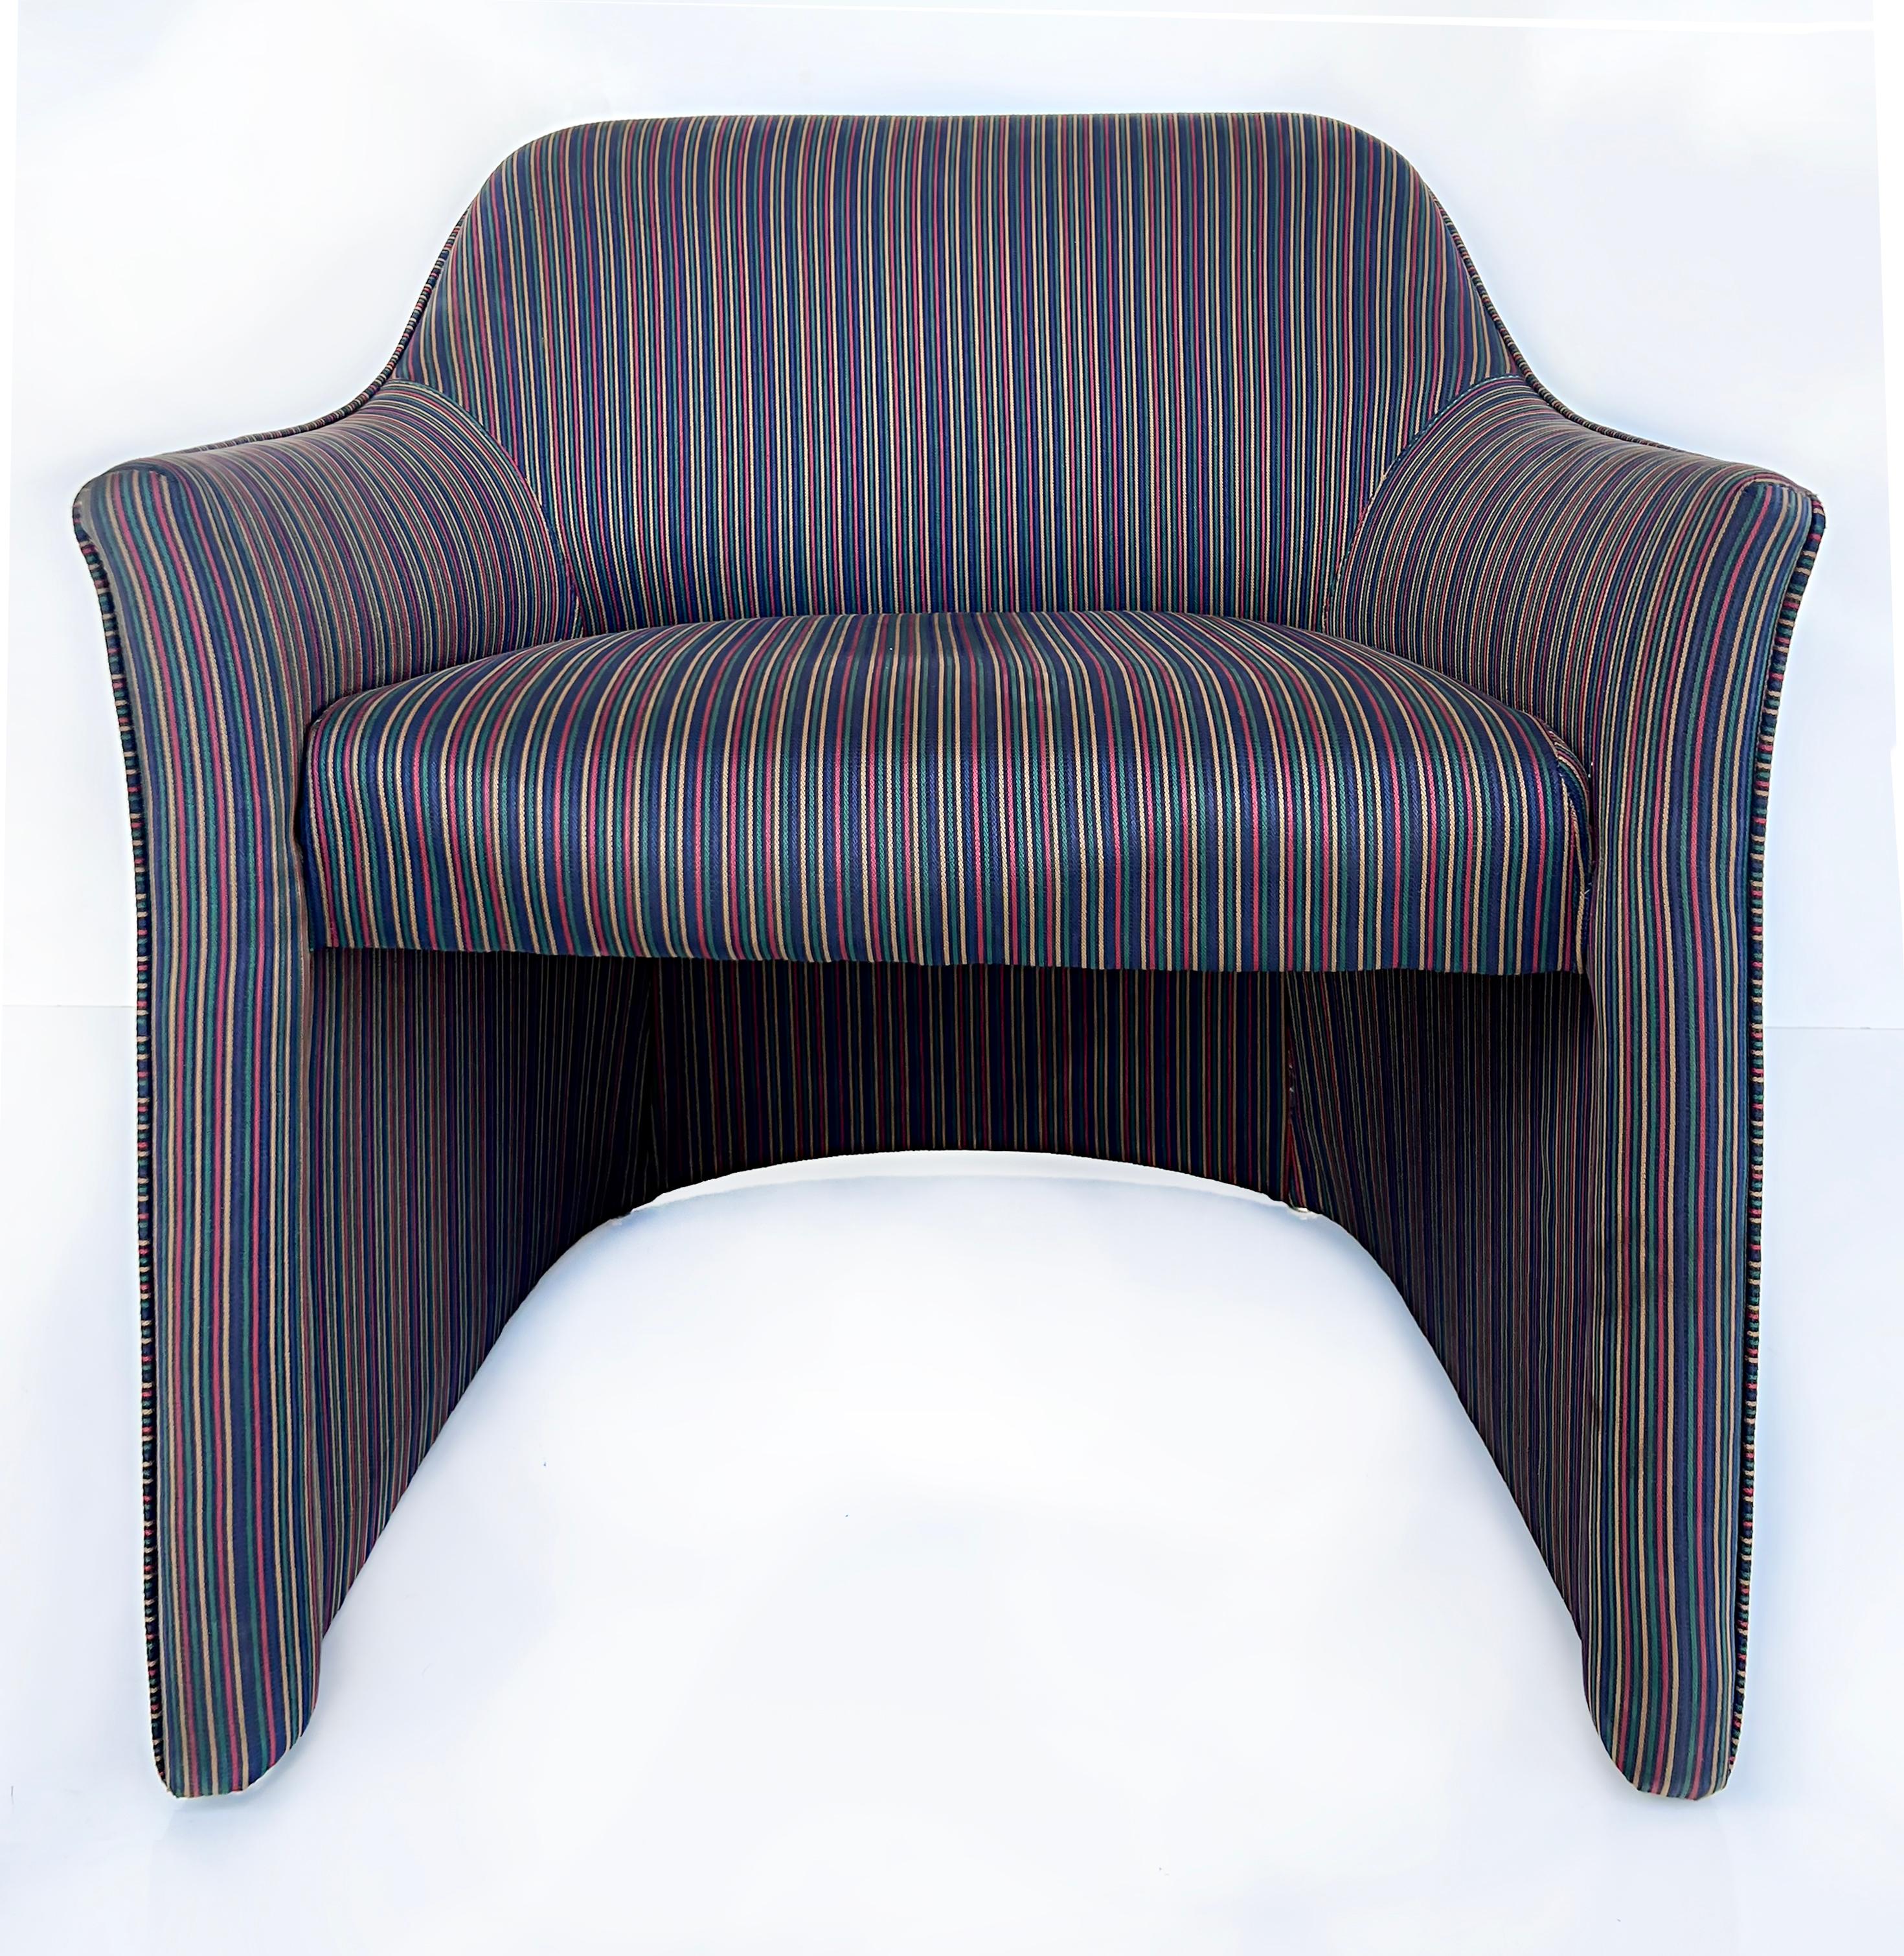 1980s Upholstered Postmodern chairs by Ward Bennett, pair.

 Offered for sale is a pair of upholstered Postmodern chairs by Ward Bennett, The chairs have great form and are well-made. The chairs are in original condition and are upholstered in a